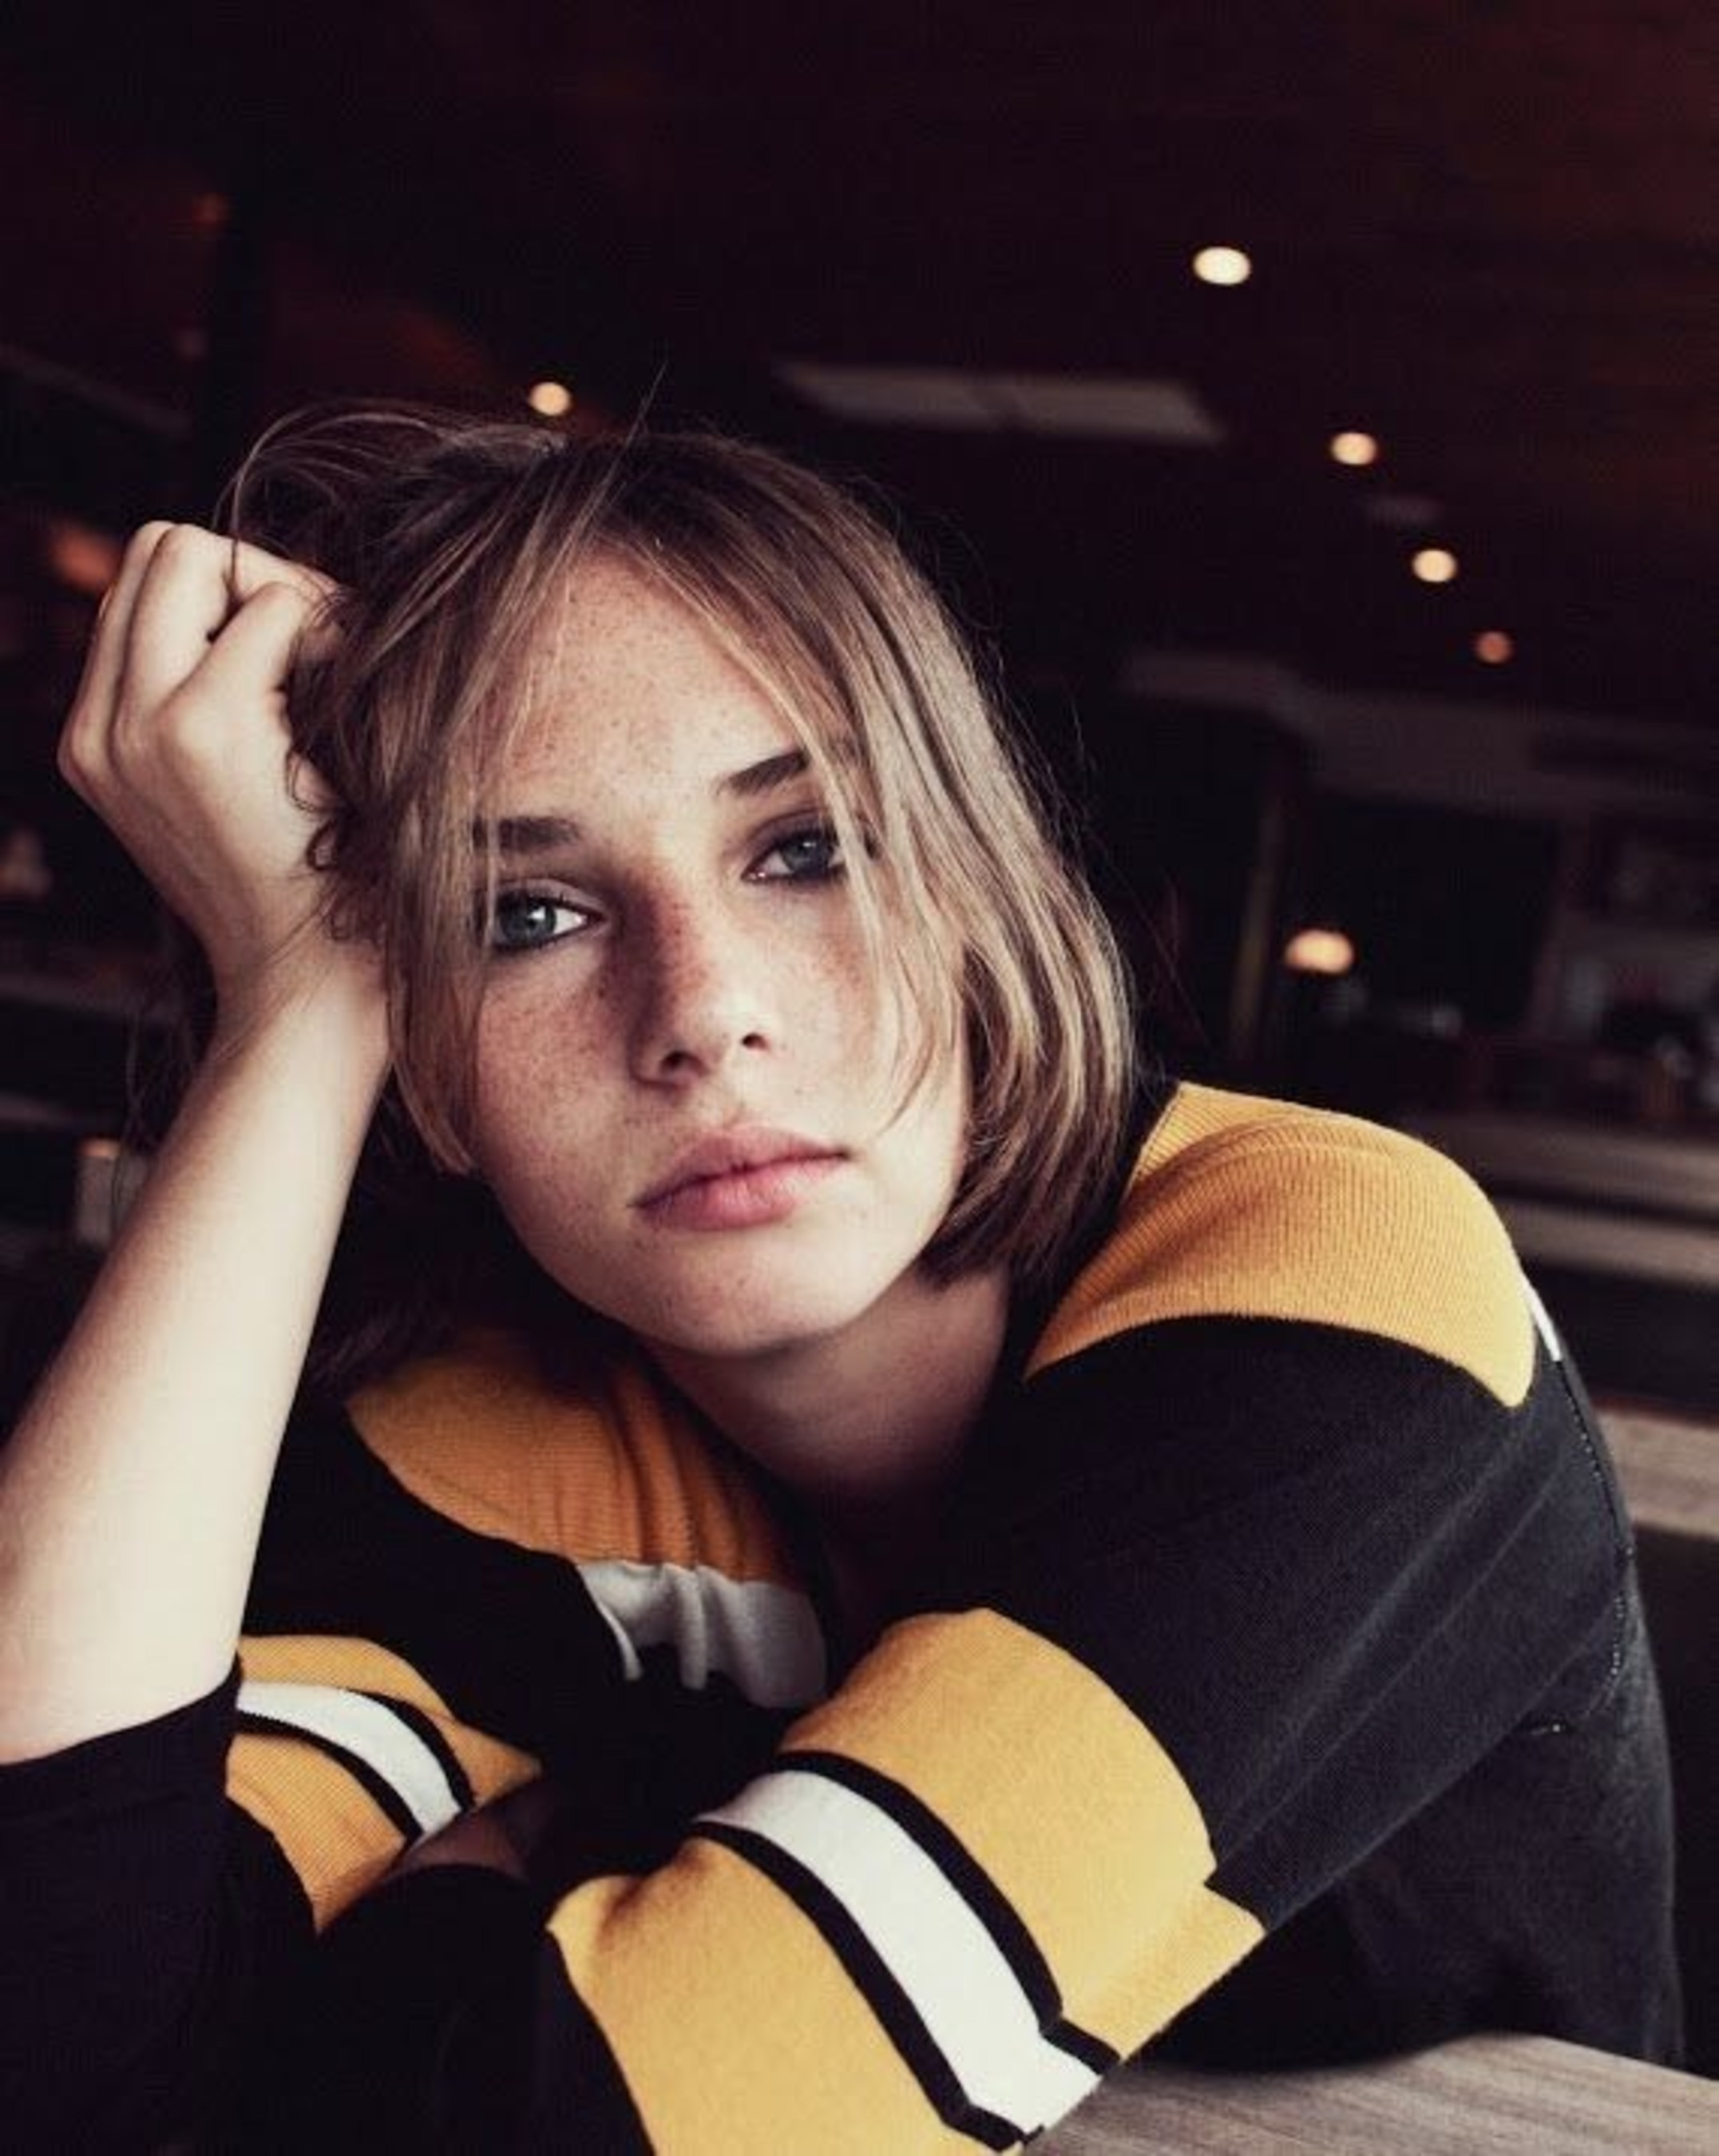 AllSaints Spring 17 preview featuring Maya Hawke